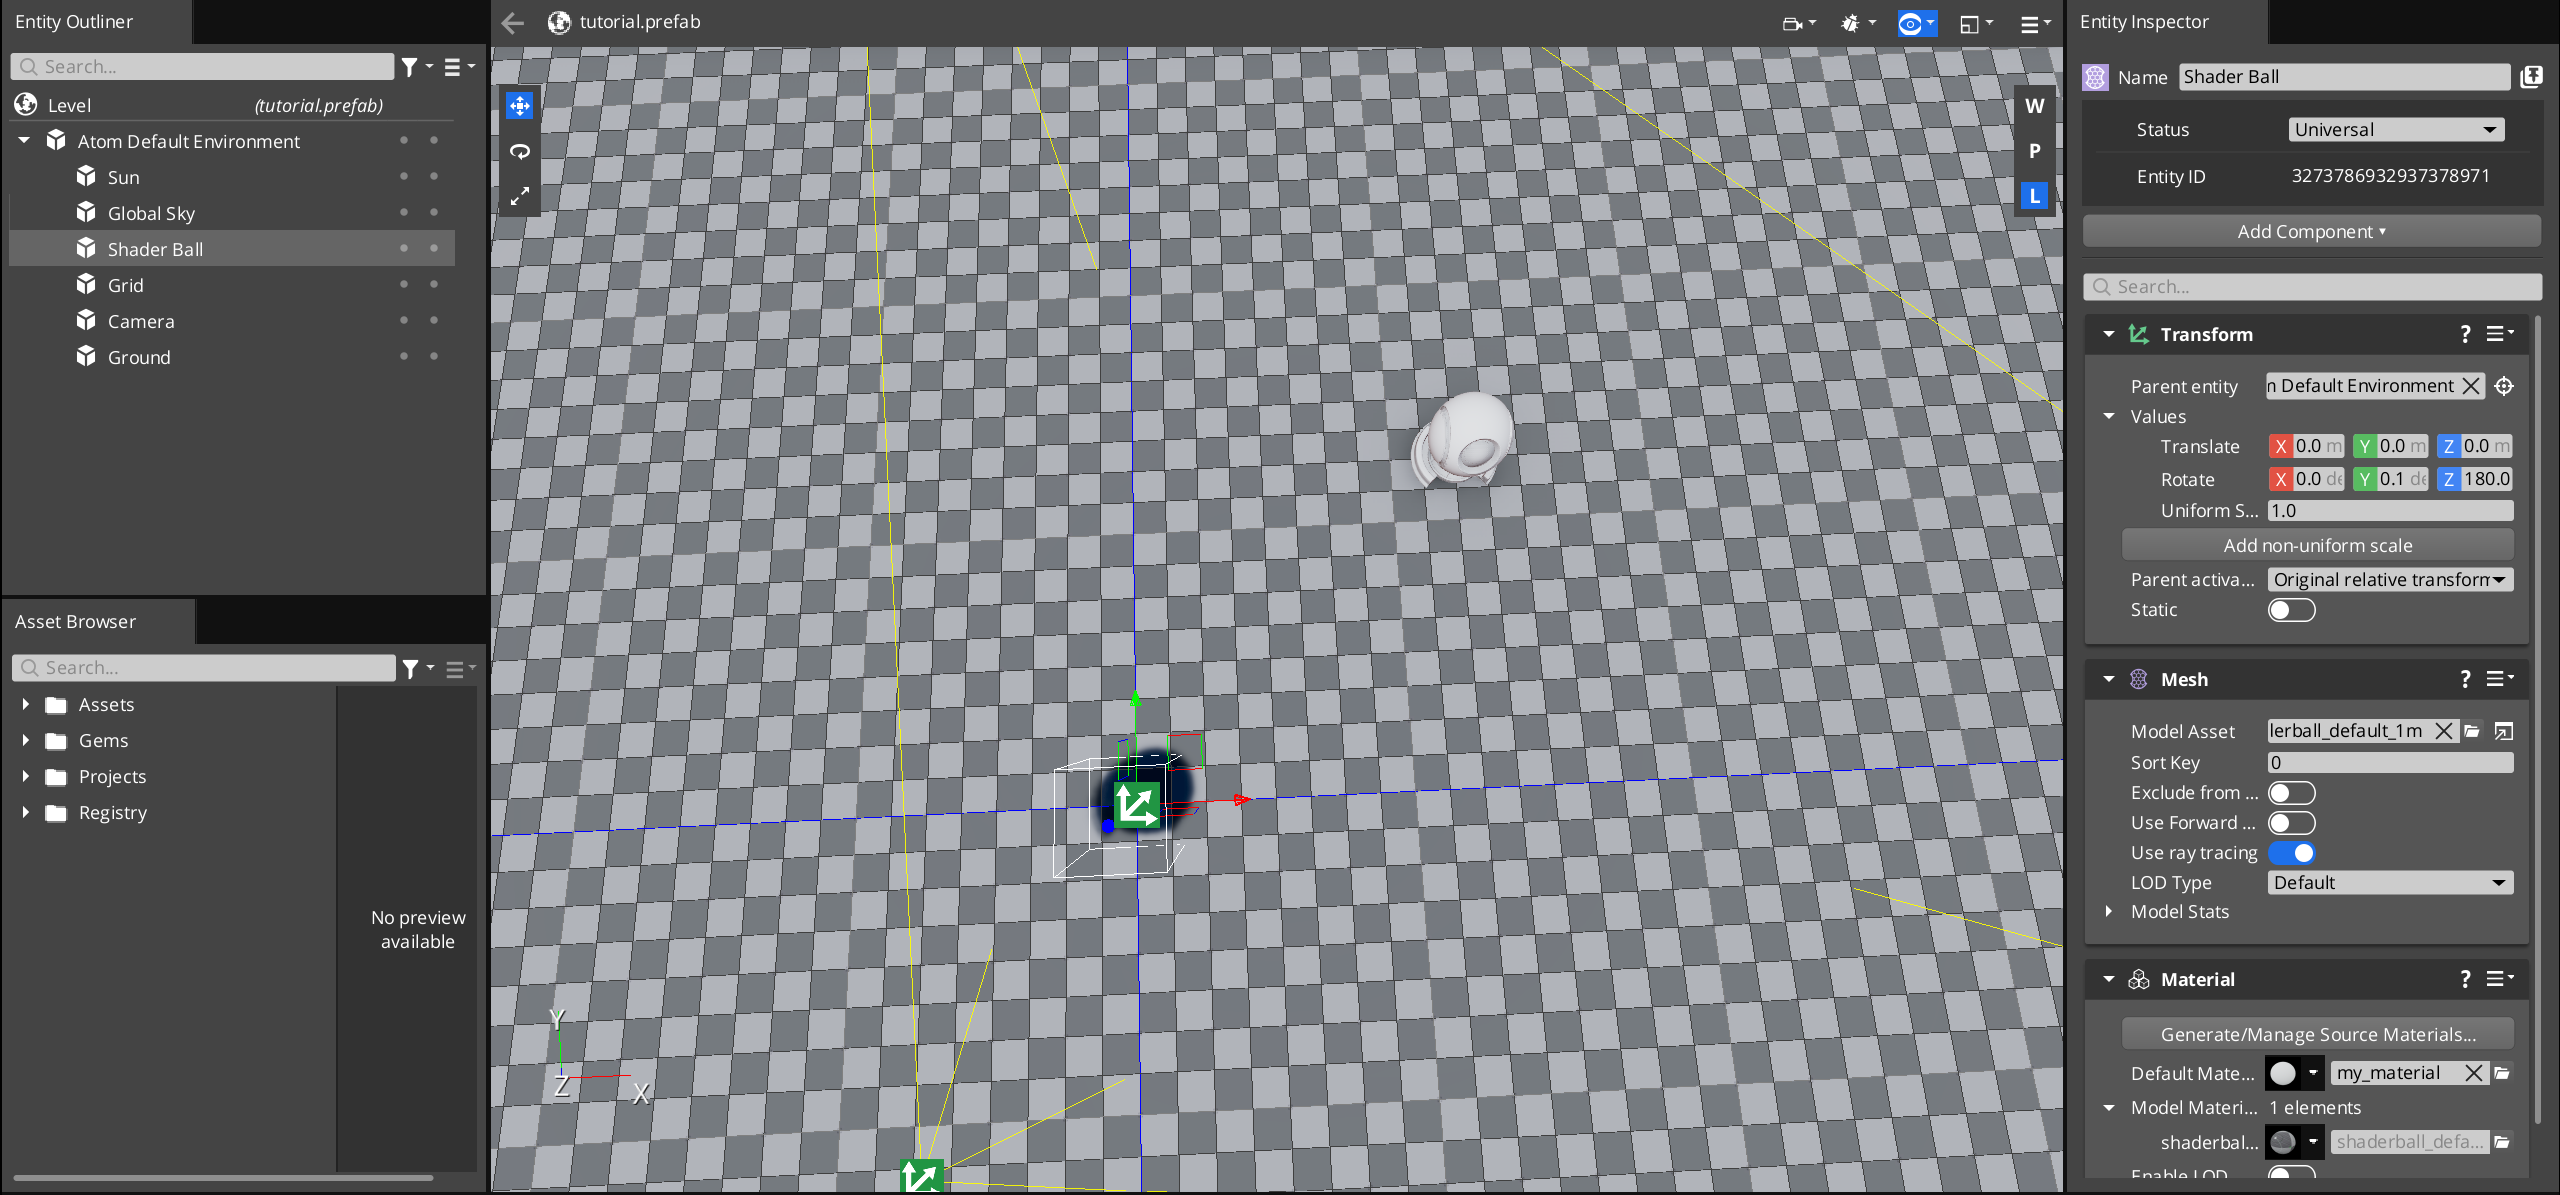 The shader ball in the Editor, after using the offset from the adjustable properties in the Material Editor.